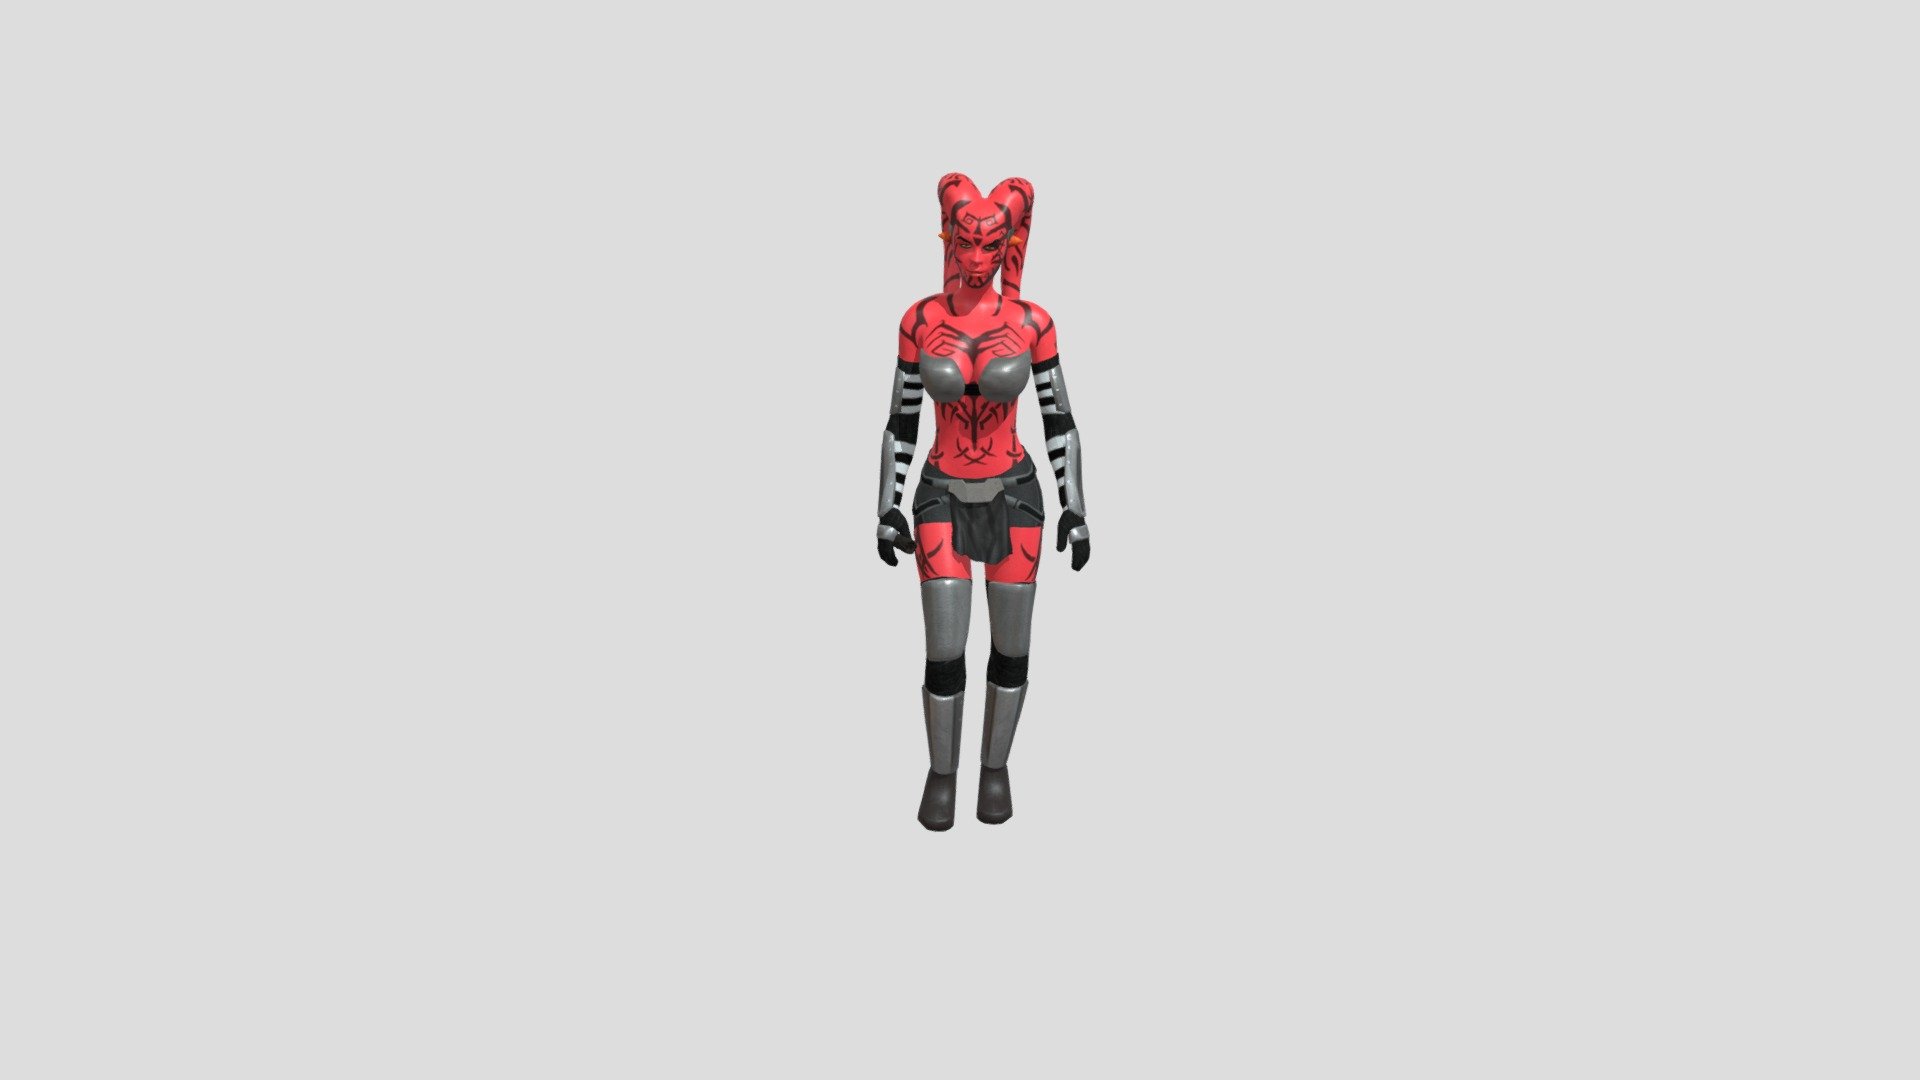 My original model of sith lady Darth Talon. Since I didn't find a Darth Talon to download anywhere, I created my own. This model was made in Blender and original textures I made in GIMP. Original body was created in Makehuman. I took inspiration from mobile game Galaxy of Heroes and pictures on Google. Armature is compatible with animations from Adobe Mixamo 3d model